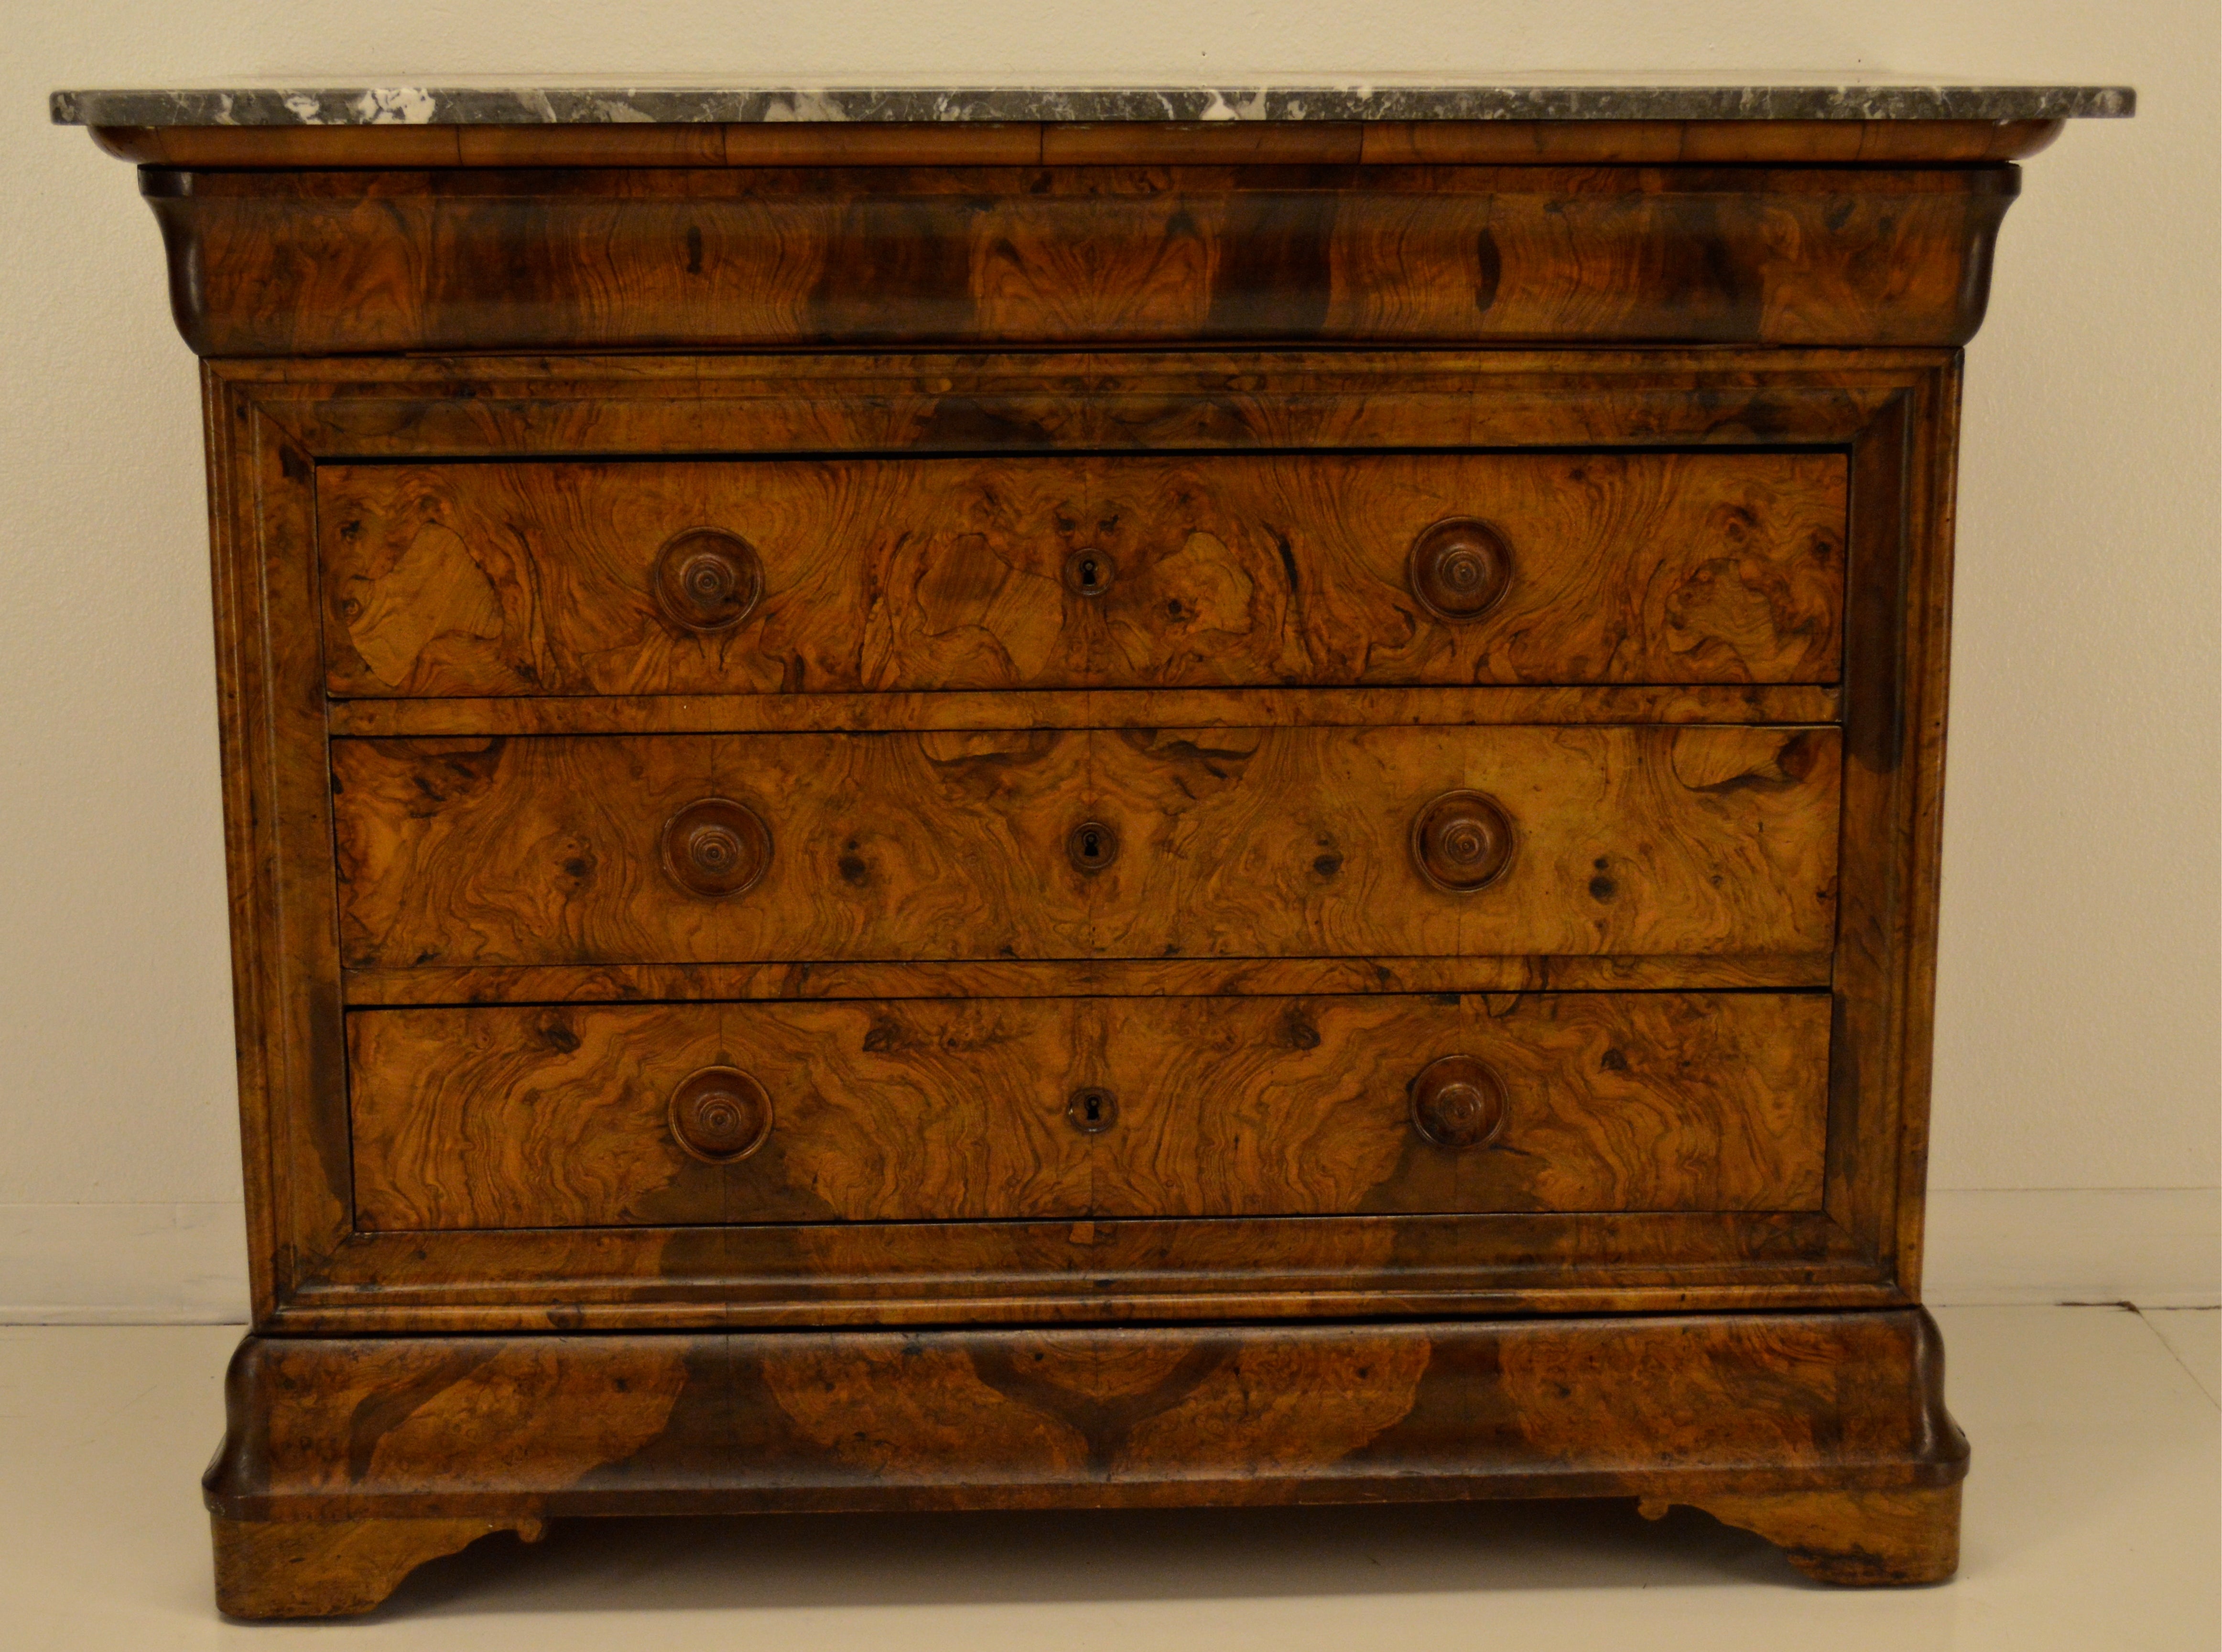 French 19th c. Louis Philippe Commode or Chest of Drawers